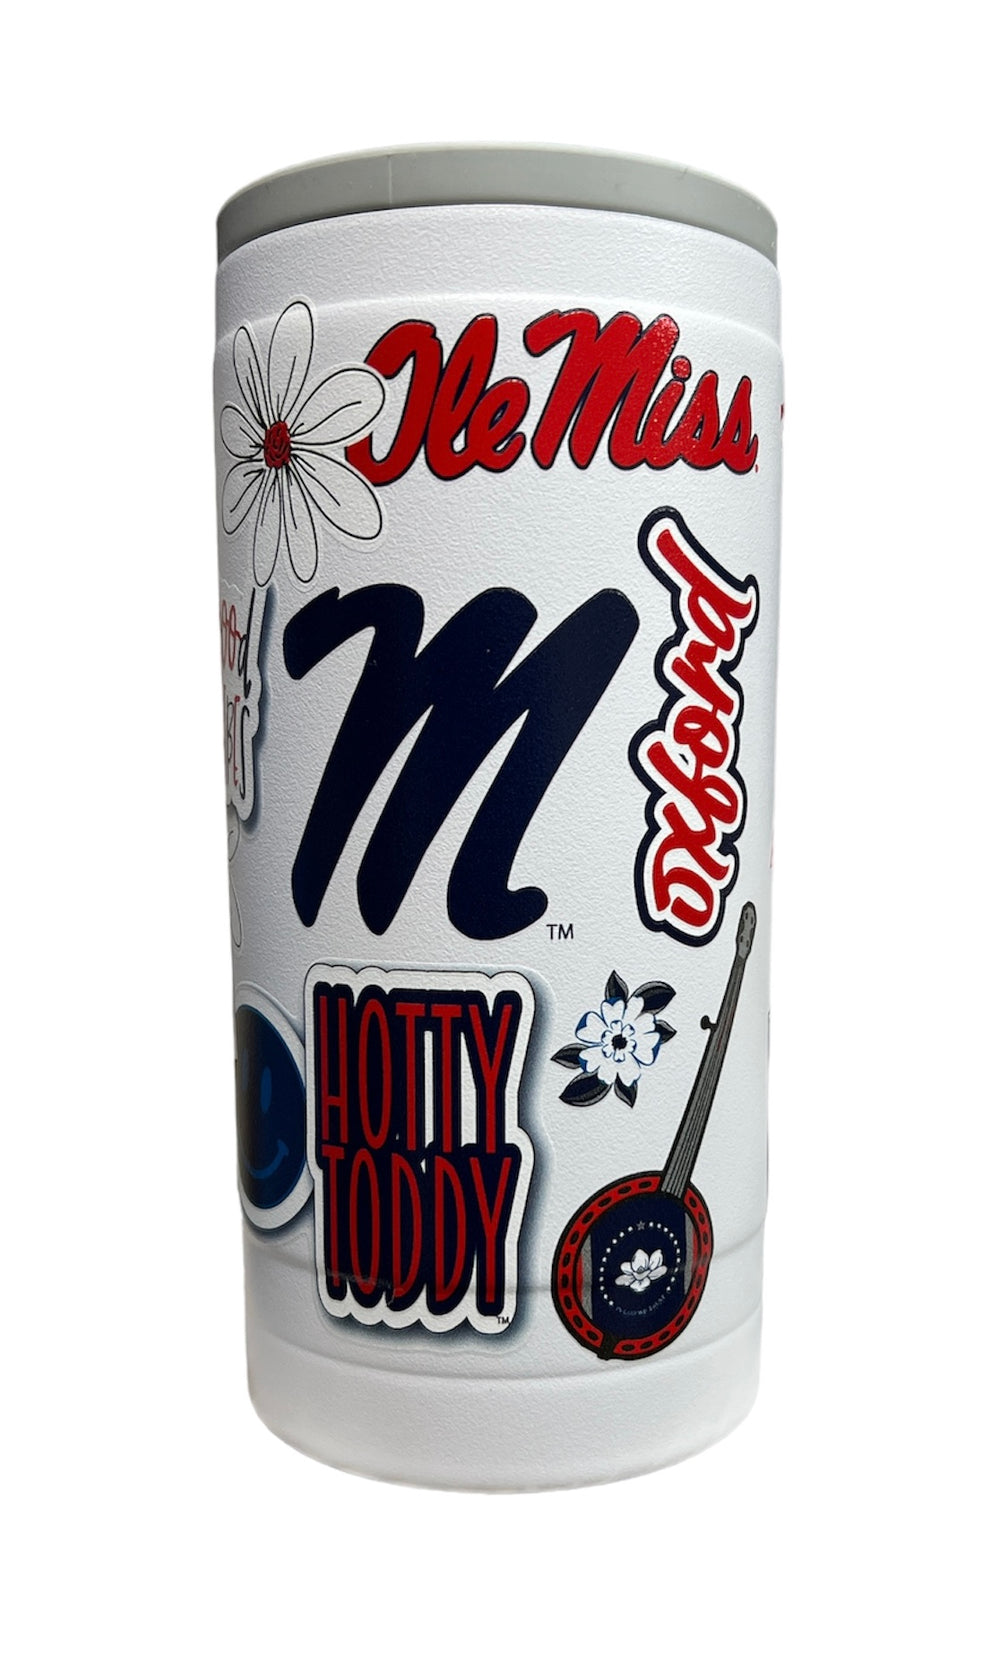 Ole Miss Powder Coat Coolie for 12 oz. cans and bottles